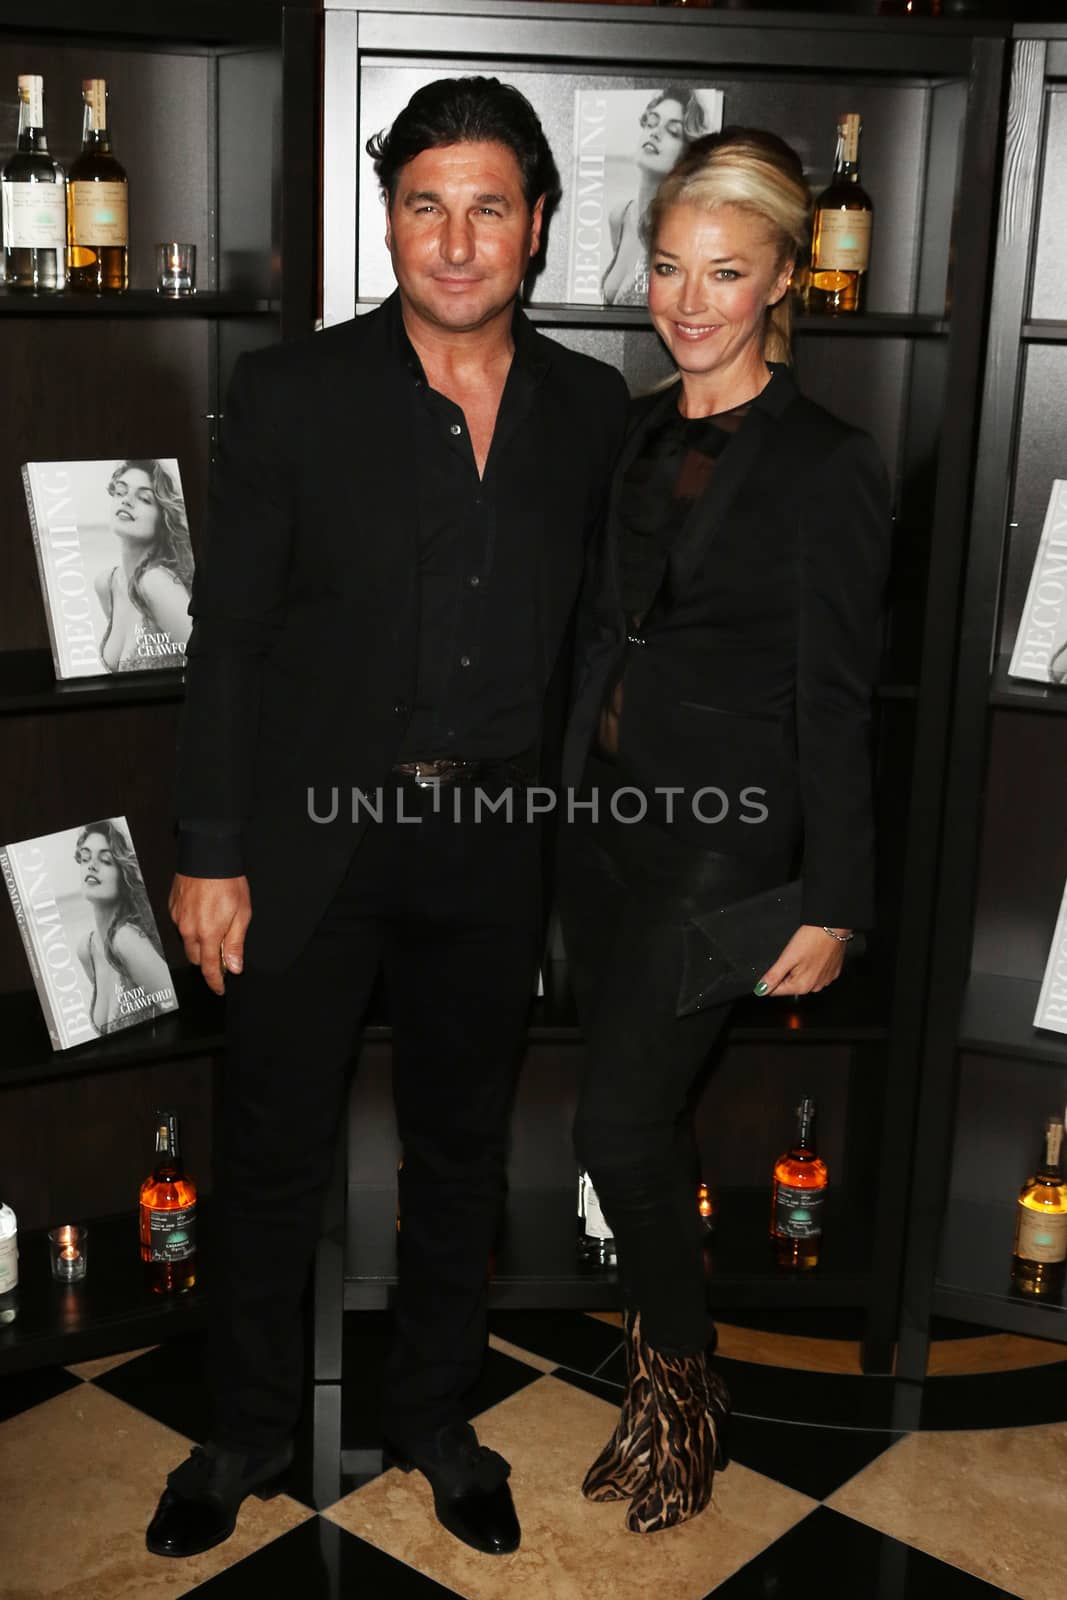 UNITED KINGDOM, London: Giorgio Veroni and Tamara Beckwith attend the joint launch of George Clooney's new tequila label, Casamigos Tequila, and Cindy Crawford's new book Becoming at the Beaumont Hotel in central London on October 1, 2015. 